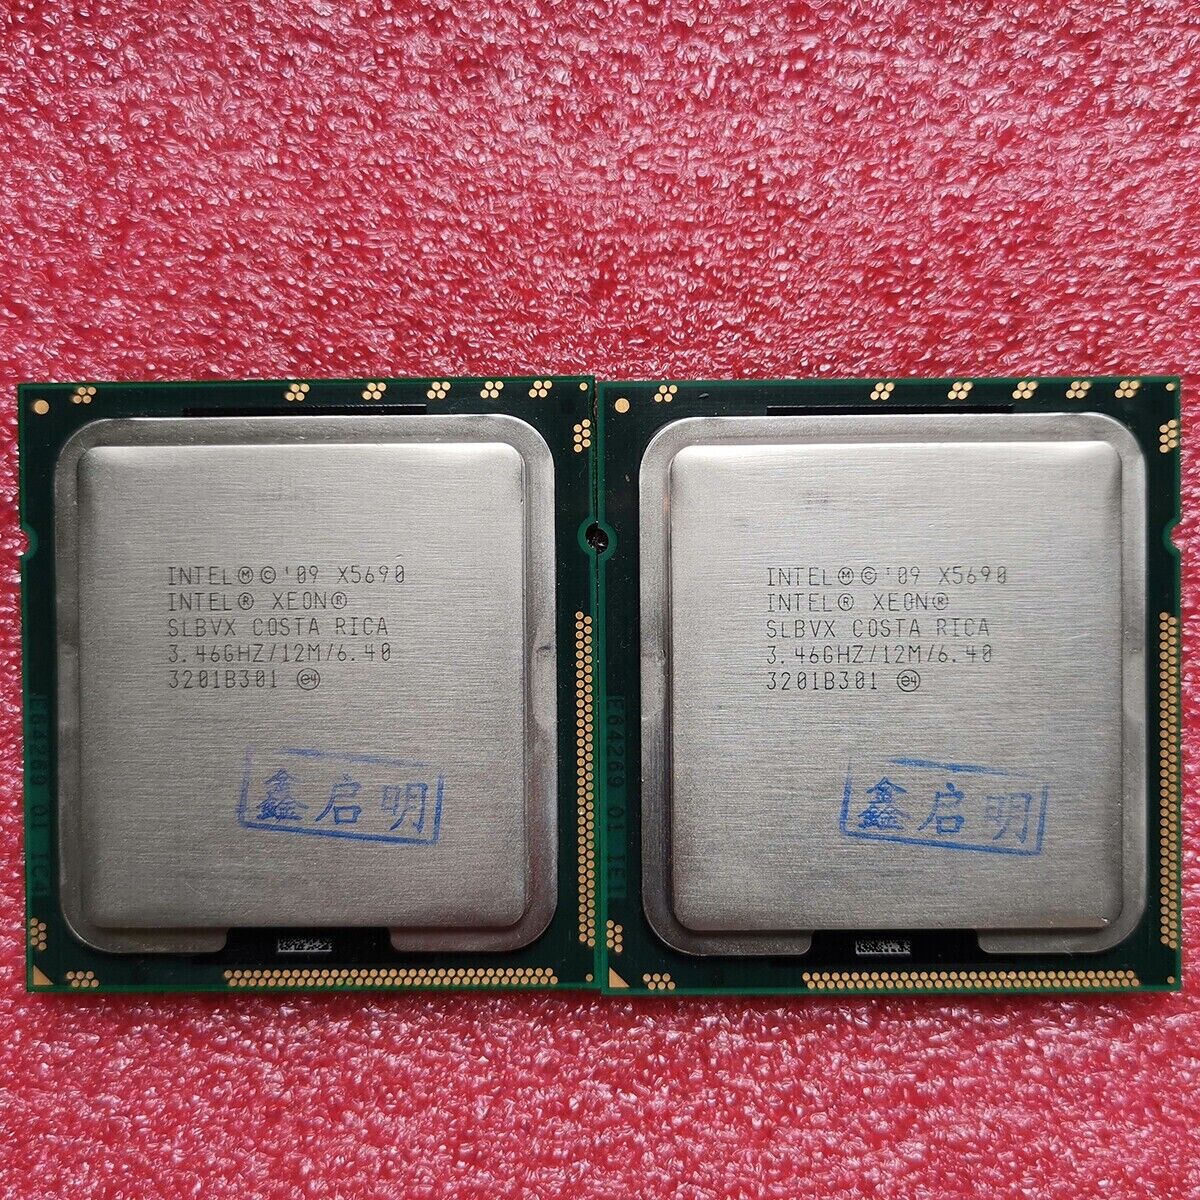 *MATCHED PAIR* Intel Xeon X5690 3.46GHz 6.4GT/s 12MB 6 Core 1333GHz SLBVX CPU